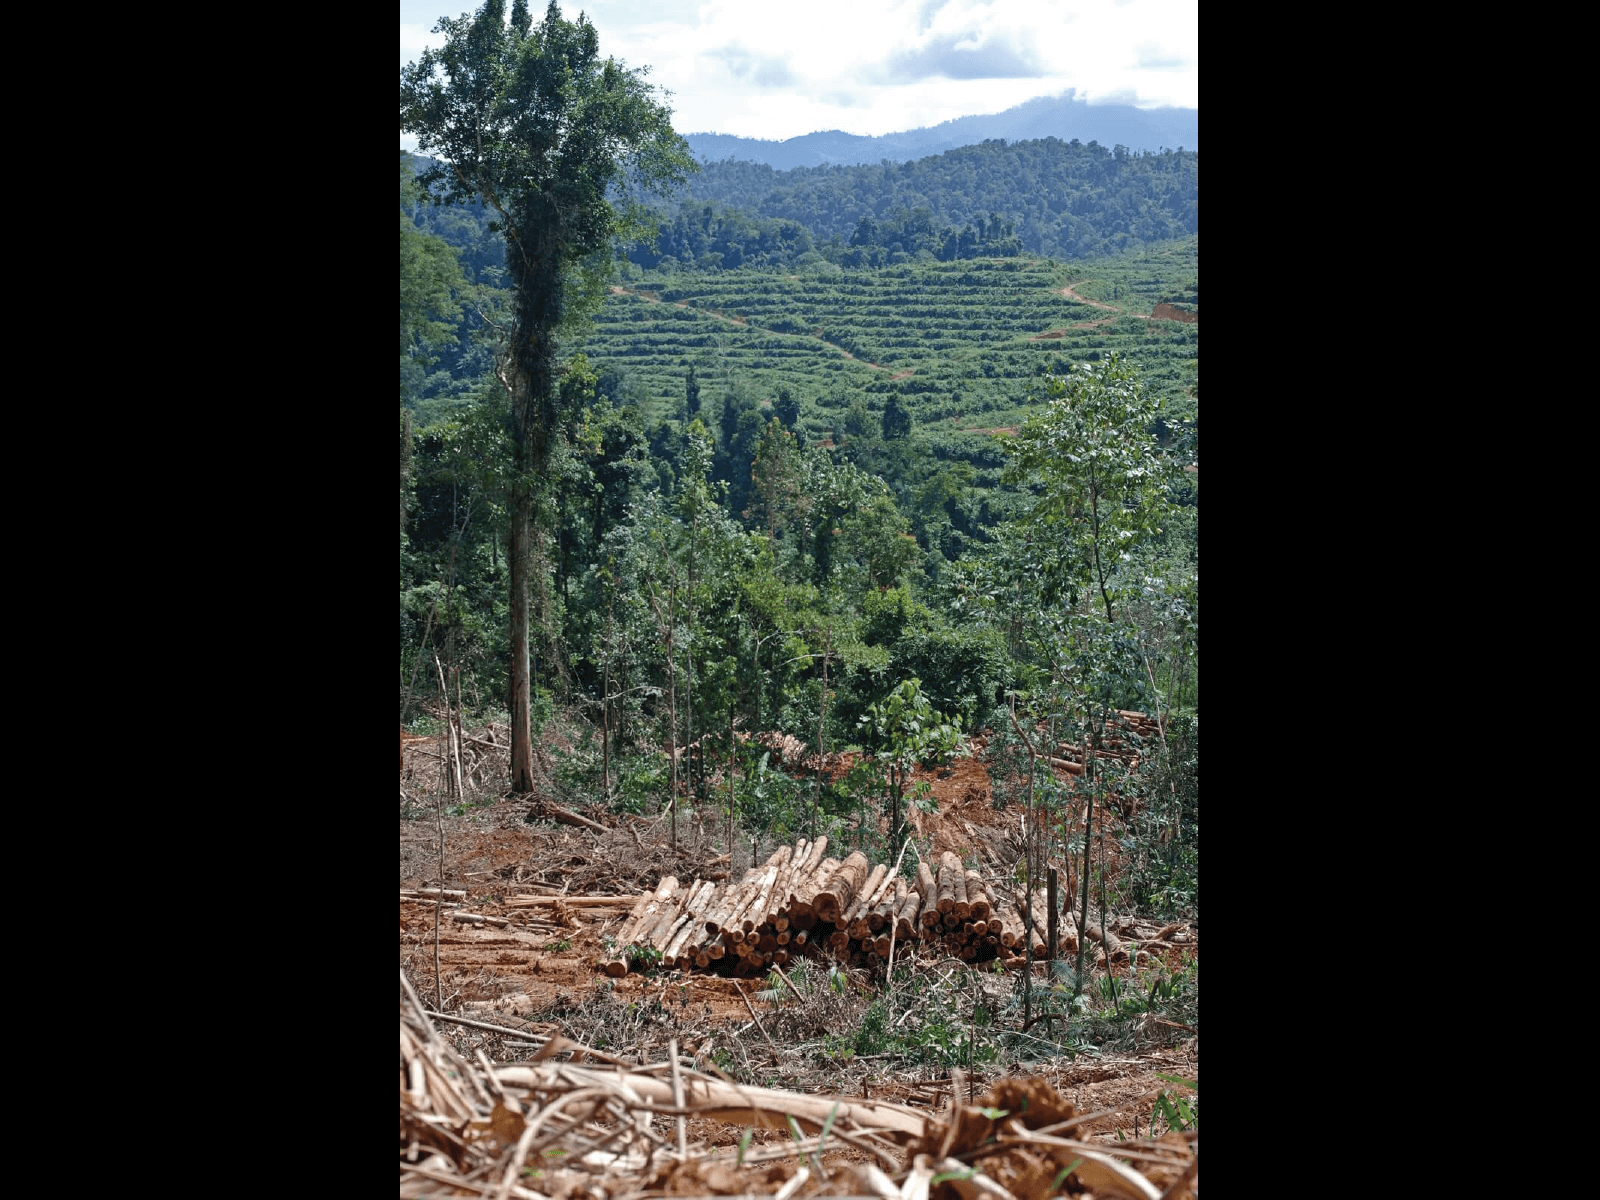 South of Kampung Kaloi, a site in the Berangkat Forest Reserve, Kelantan, being cleared for a rubber forest plantation in November 2021. (YH Law)